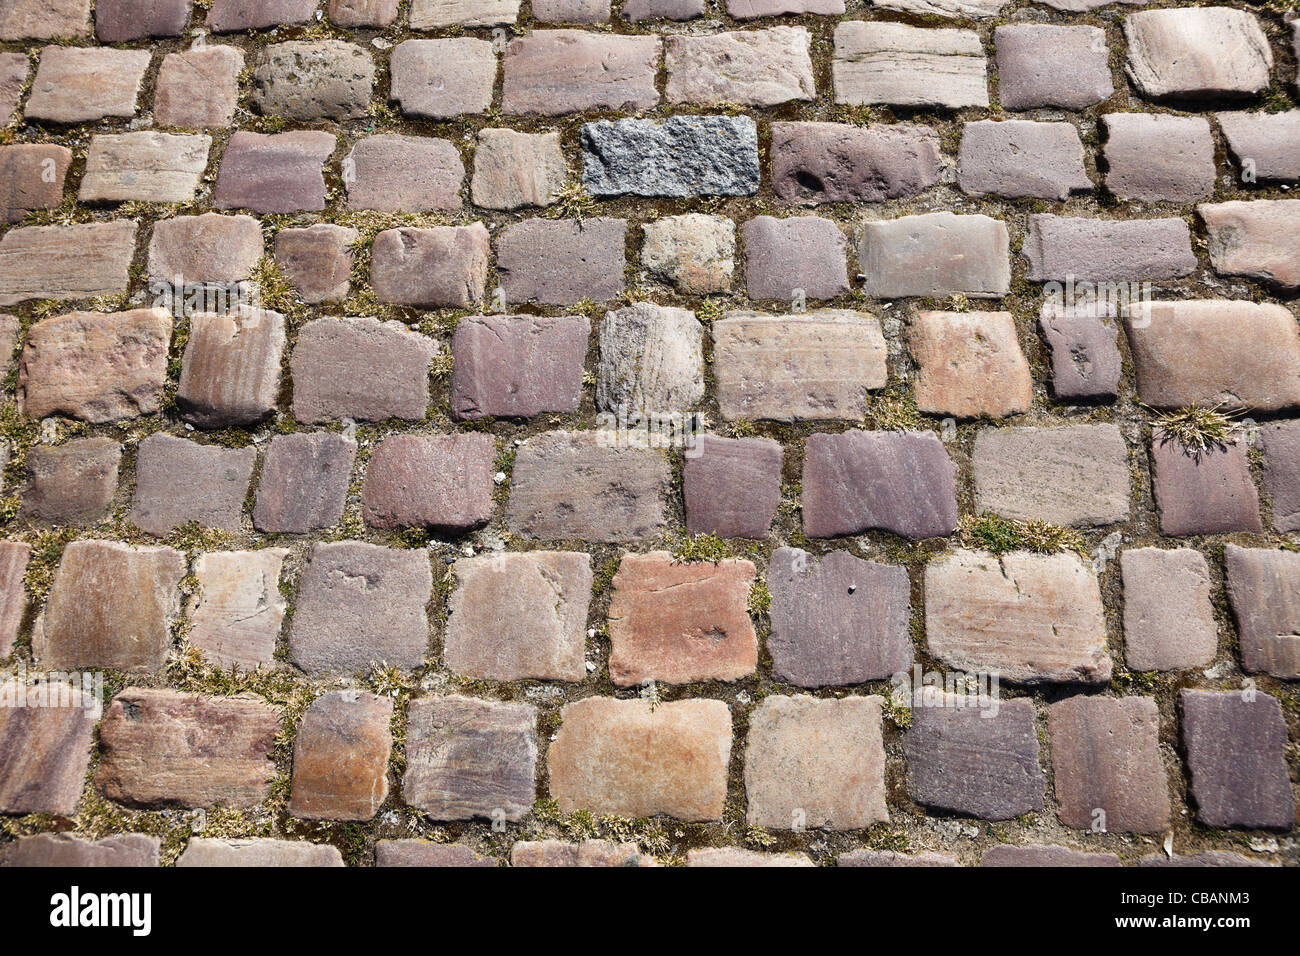 Cobbles on a street Stock Photo